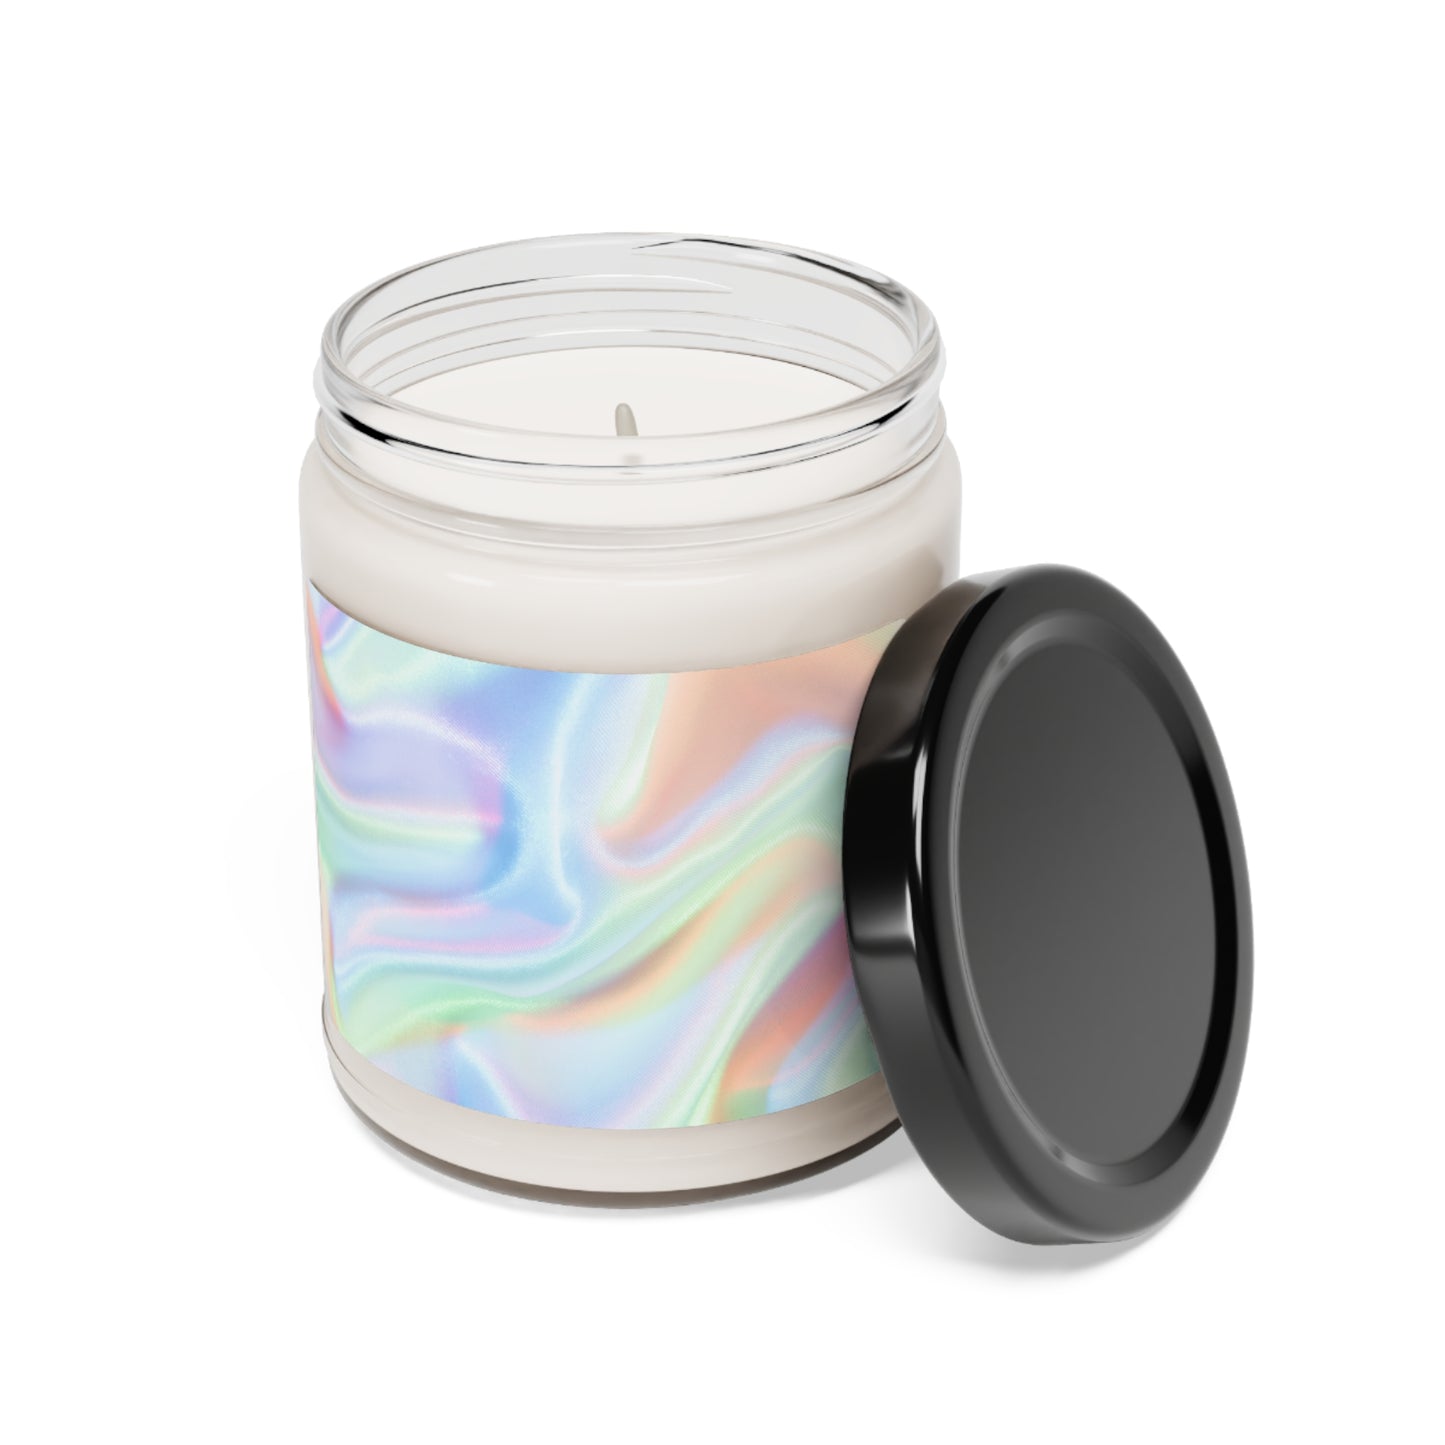 Vibrant Mosaics - Scented Soy Candle 9oz